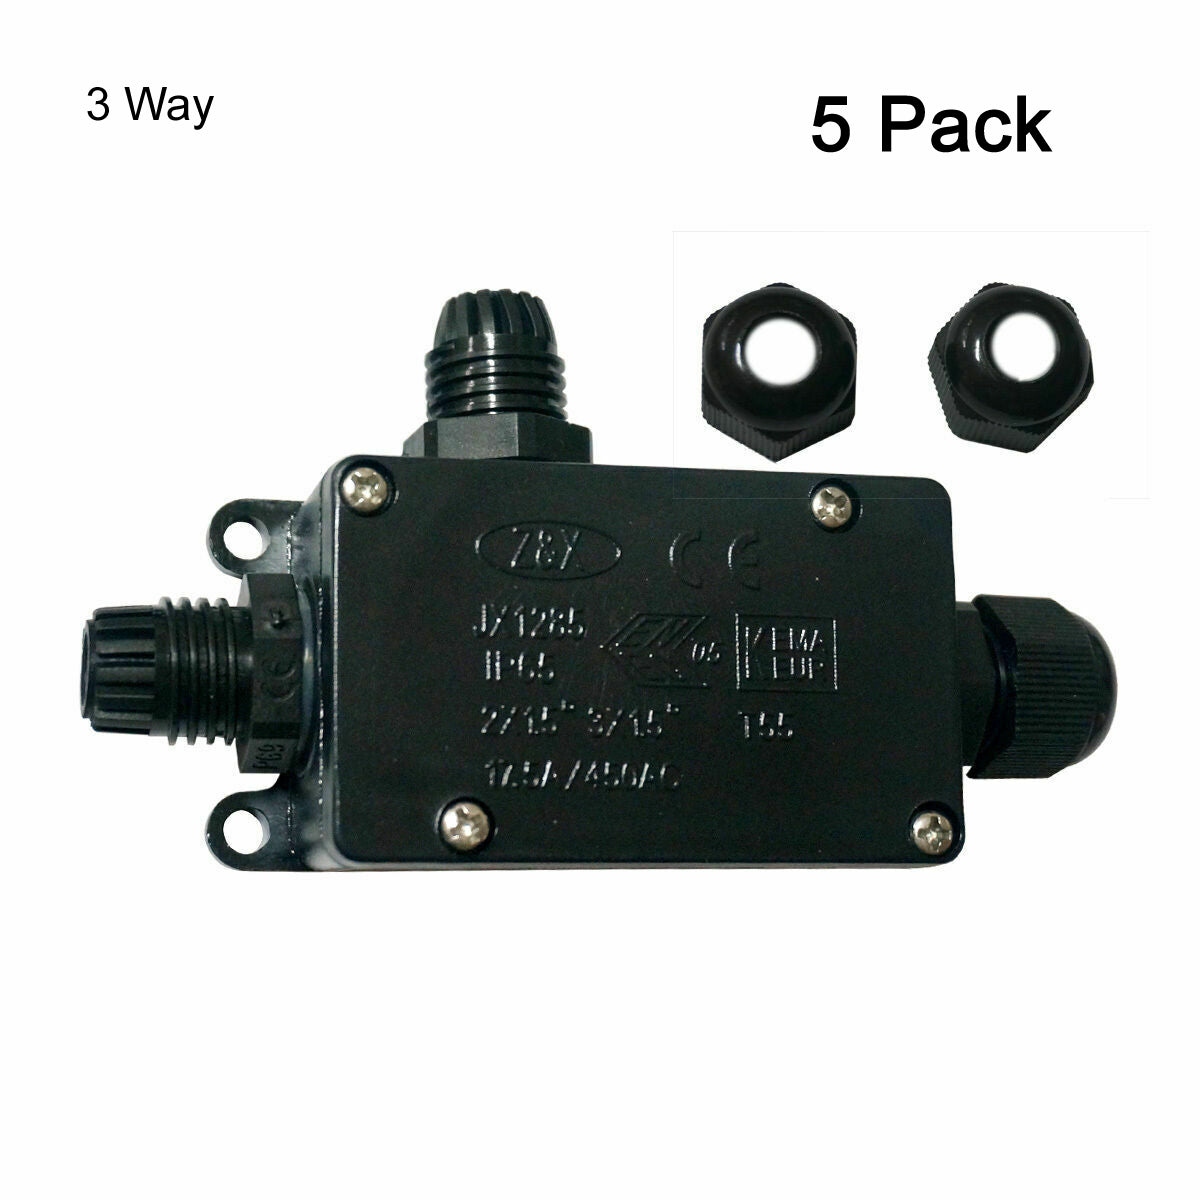 2/3 Way IP65 Waterproof Junction Box Underground Cable Line Protection Connector~1431 - LEDSone UK Ltd